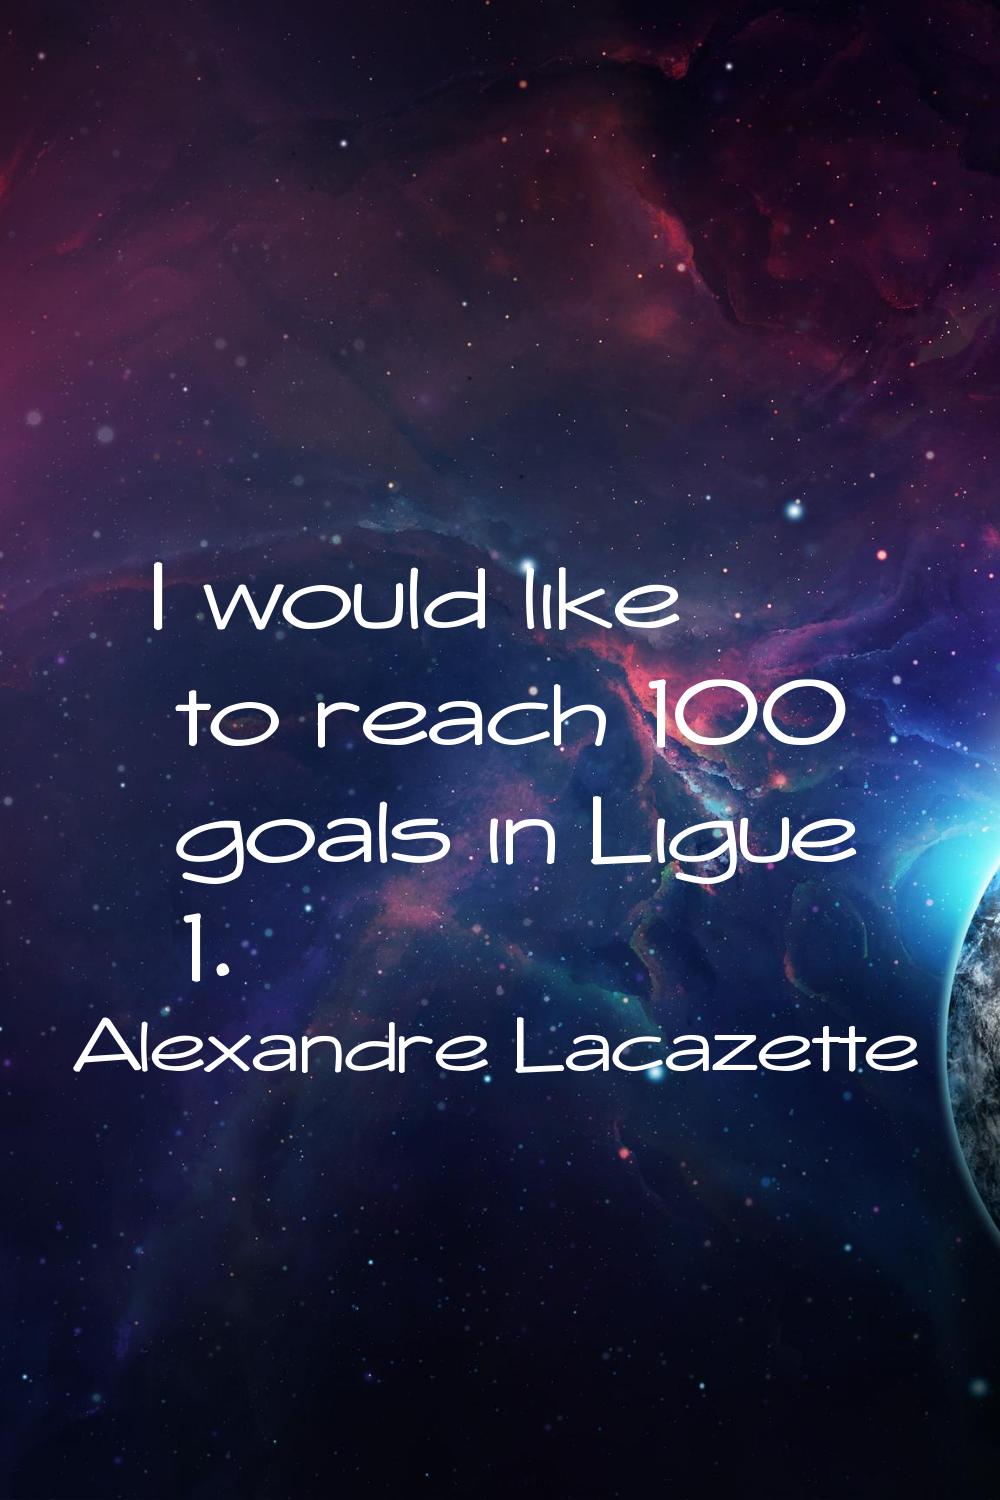 I would like to reach 100 goals in Ligue 1.